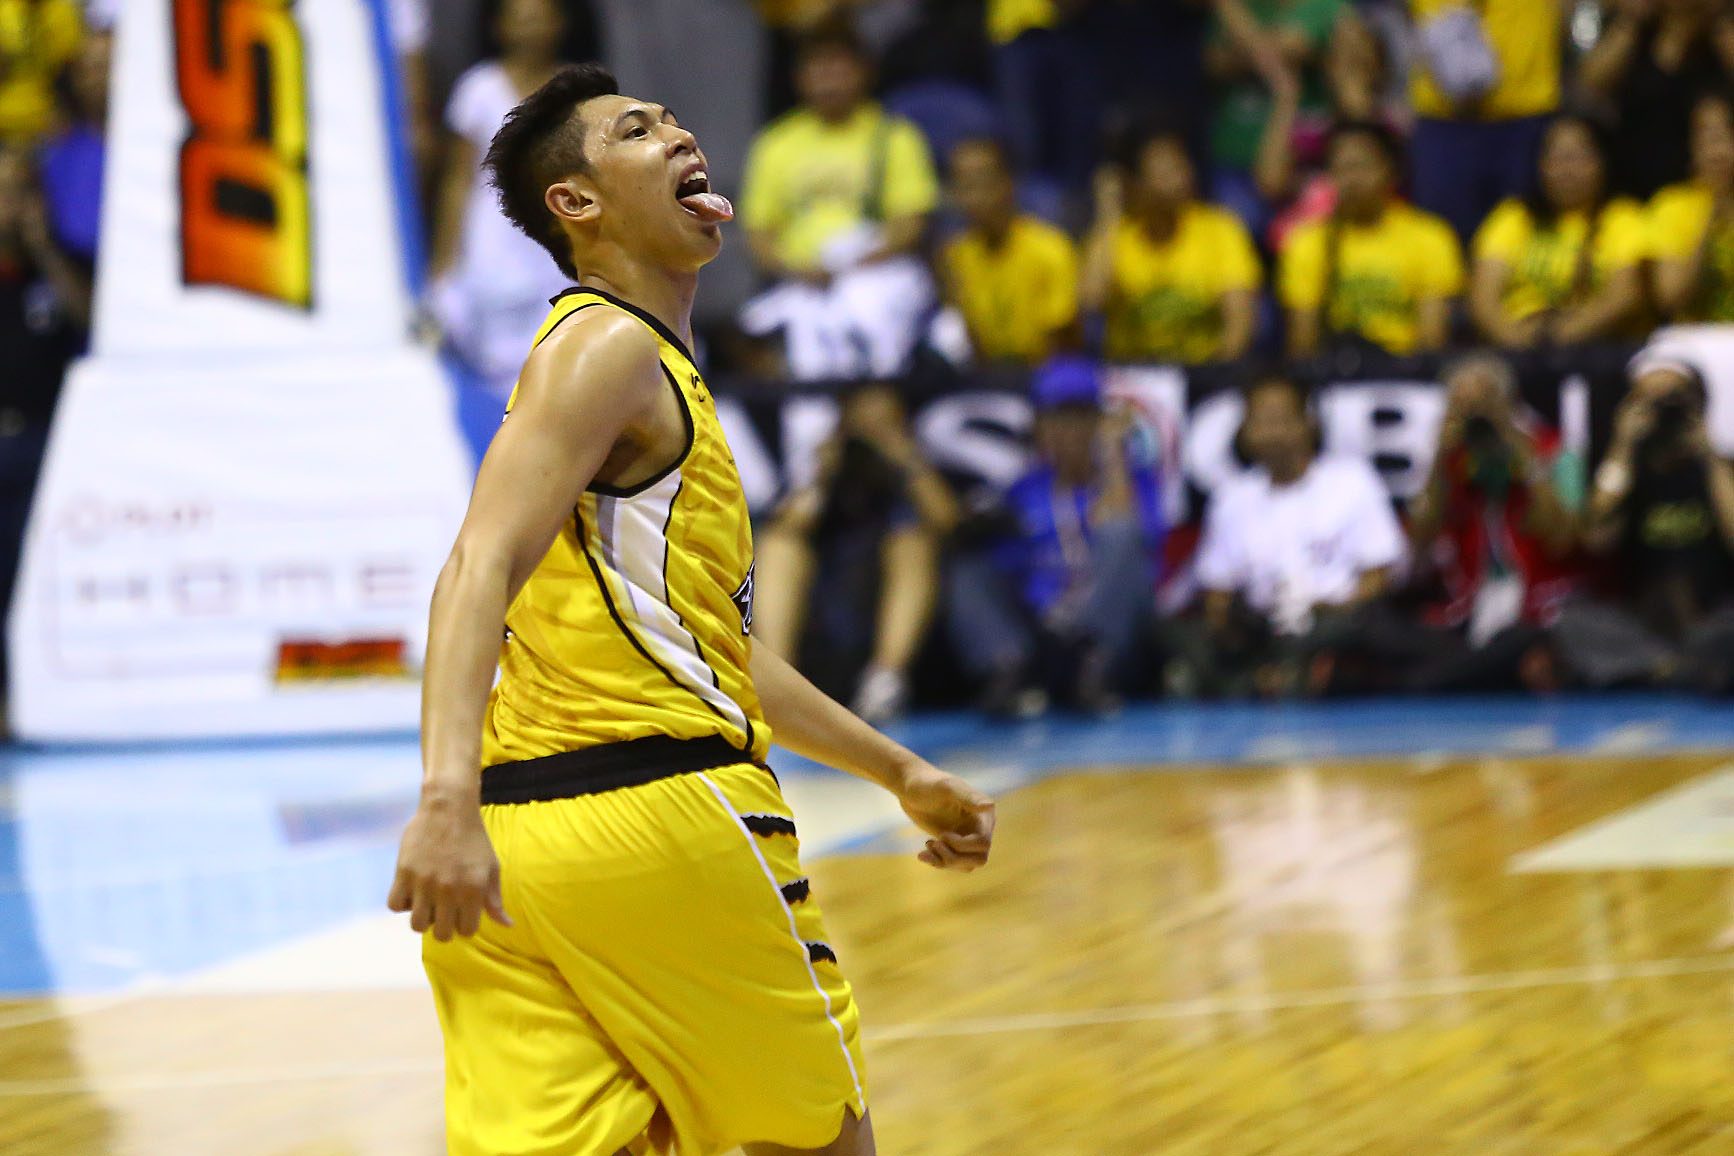 Free throws set Ferrer’s hands on fire in UAAP Finals